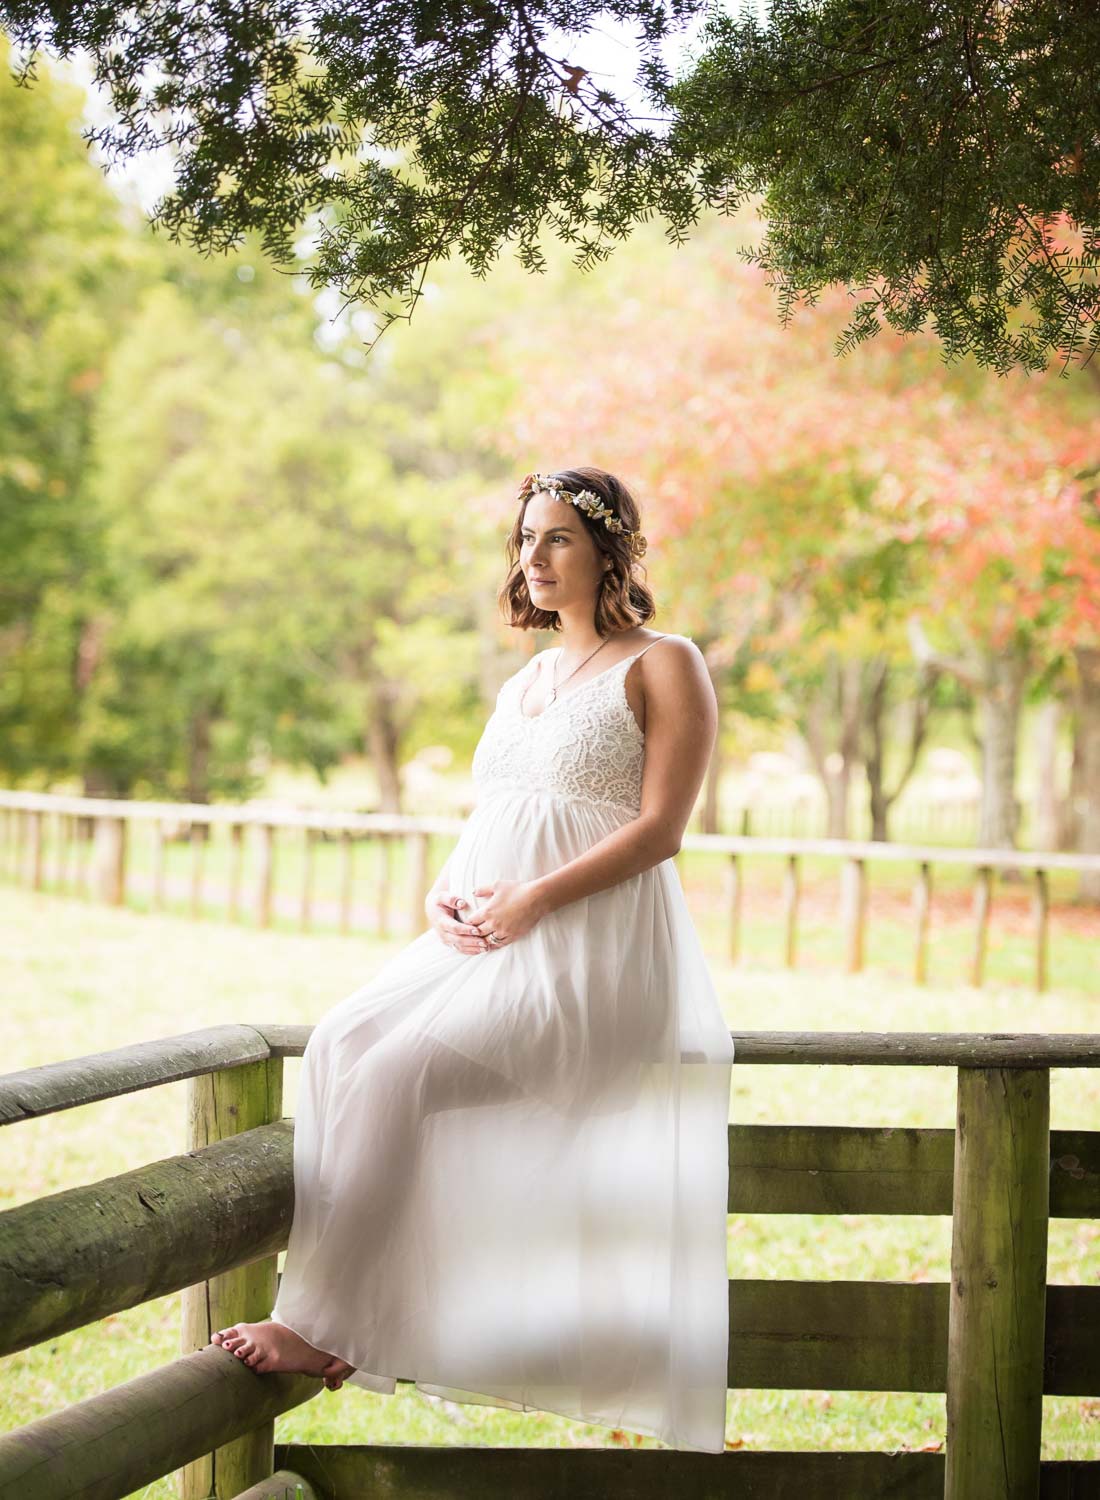 backless white lace dress by maternity photographer siobhan kelly